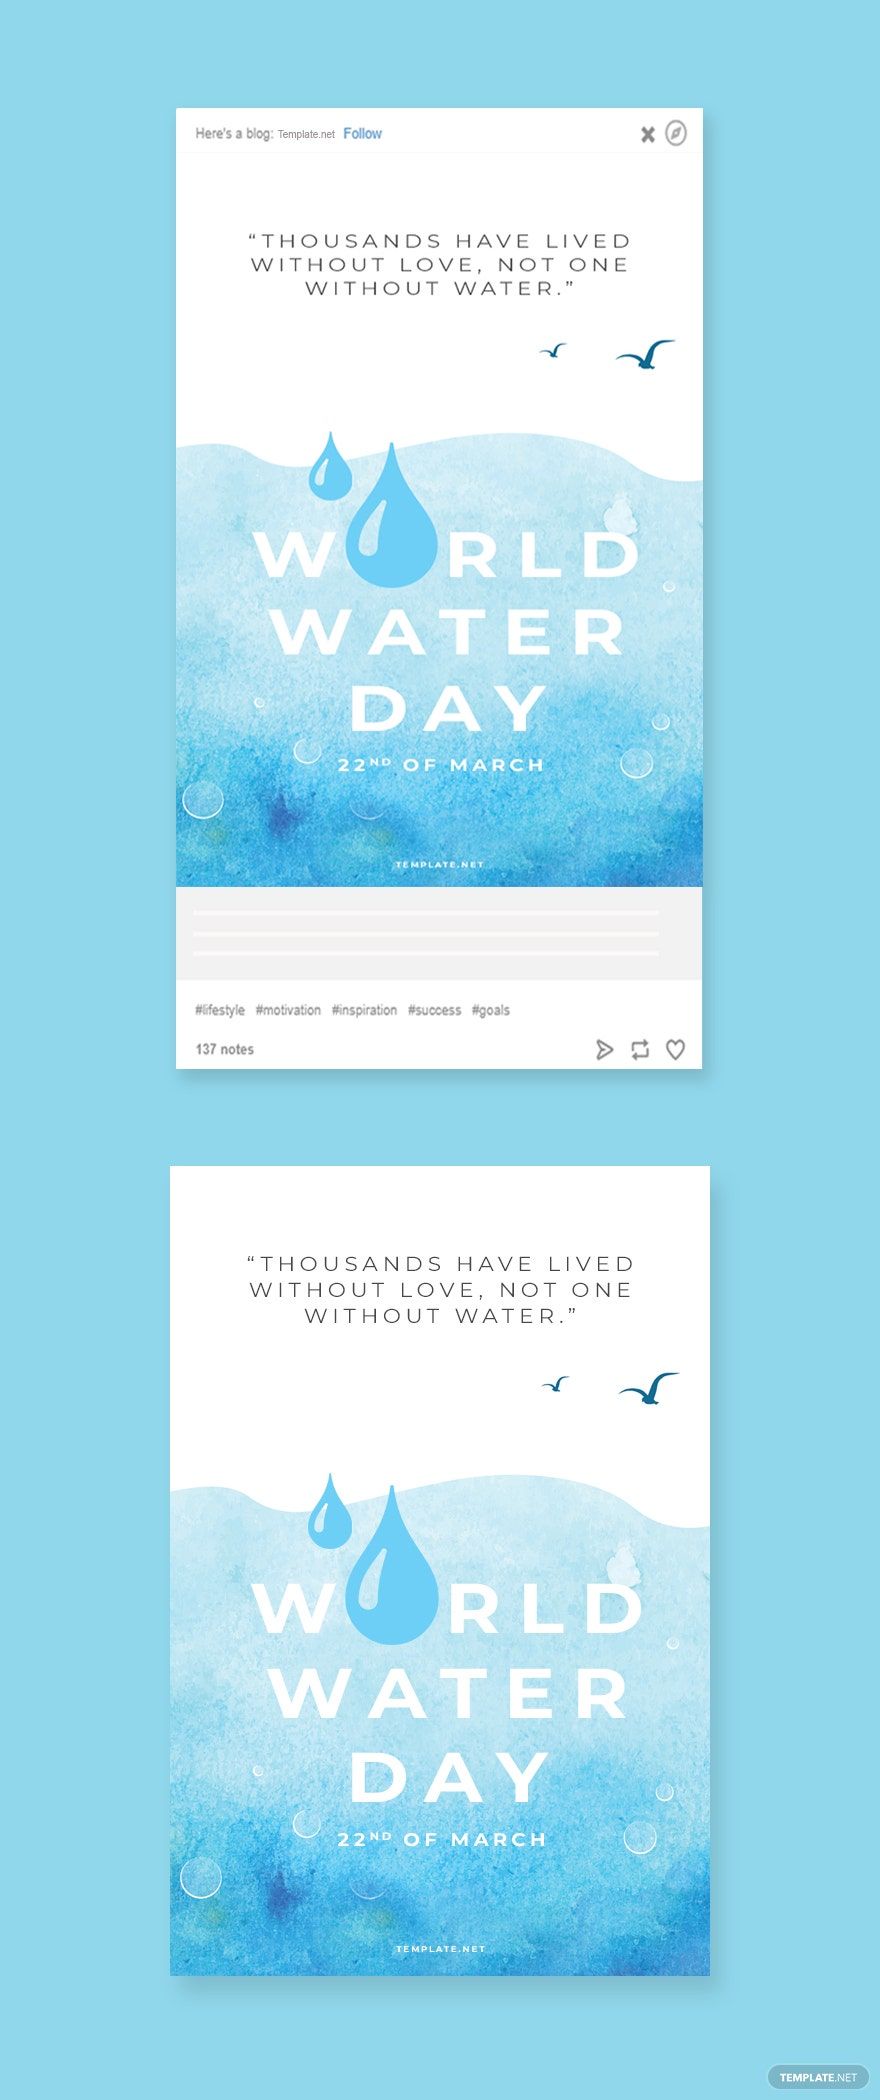 World Water Day Tumblr Post Template in PSD